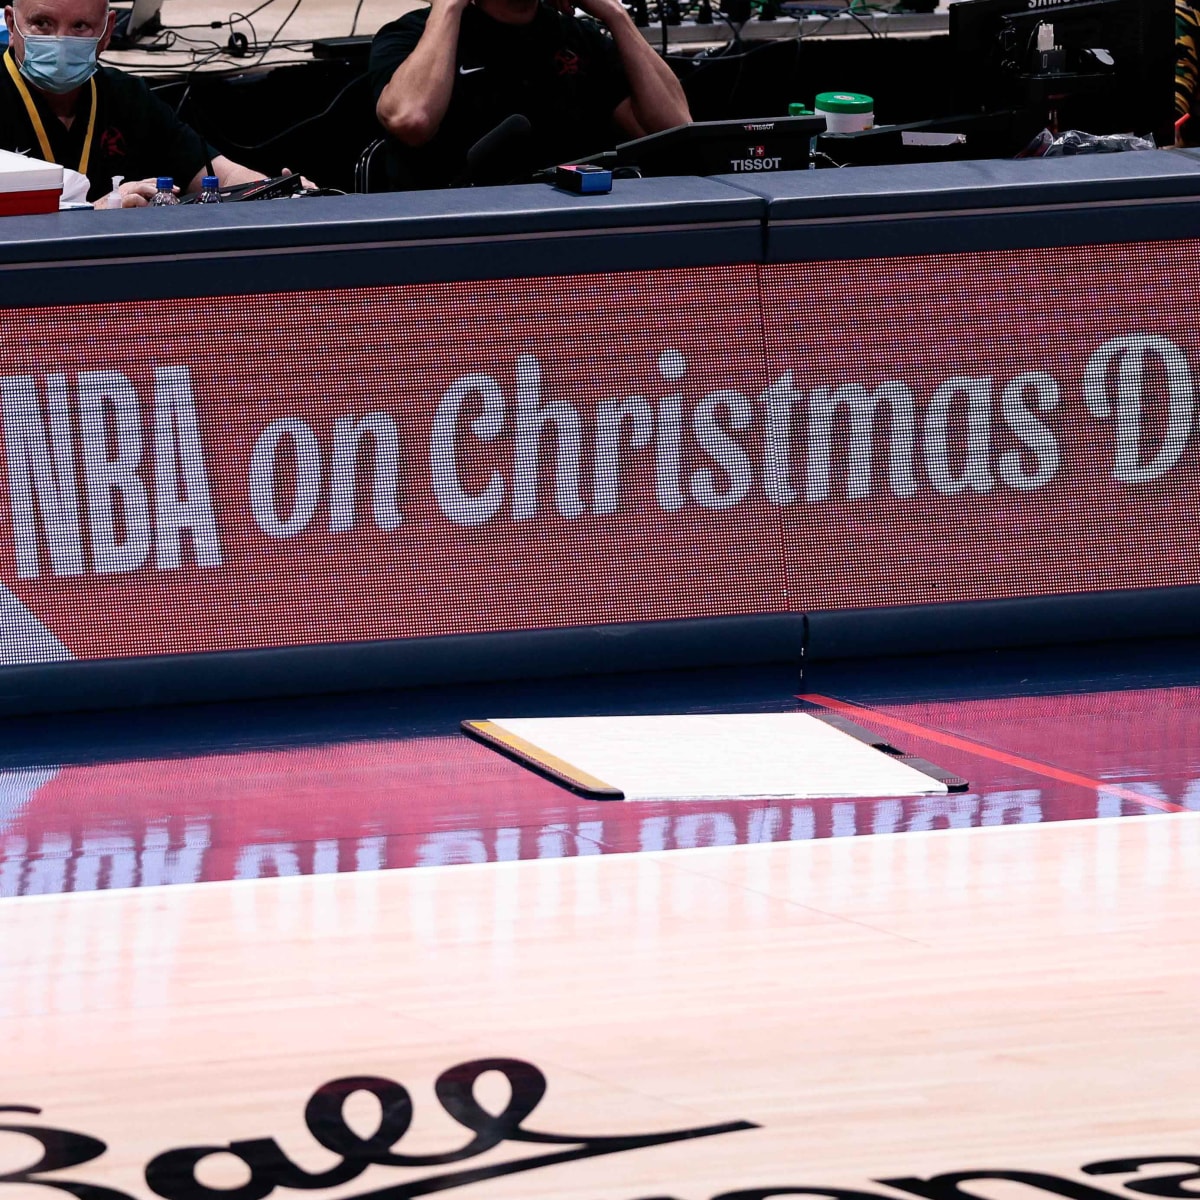 NBA Christmas Day schedule features familiar star power, per AP